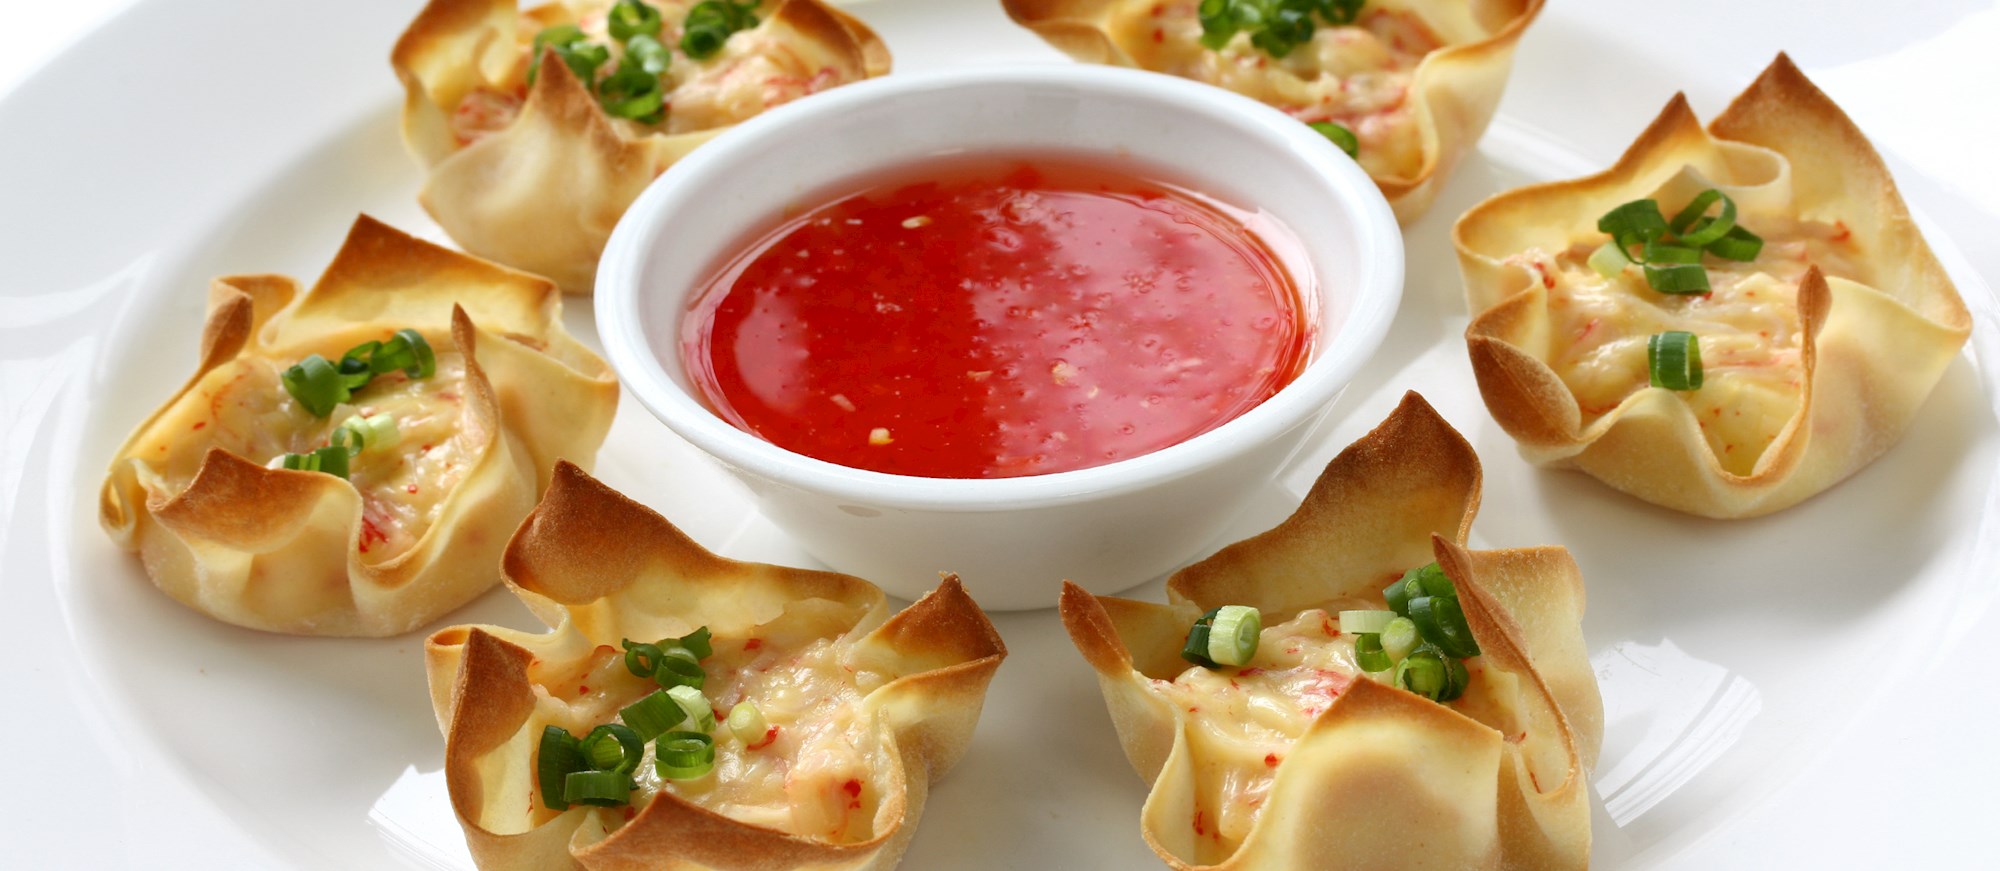 Where to Eat the Best Crab Rangoon in the World? | TasteAtlas